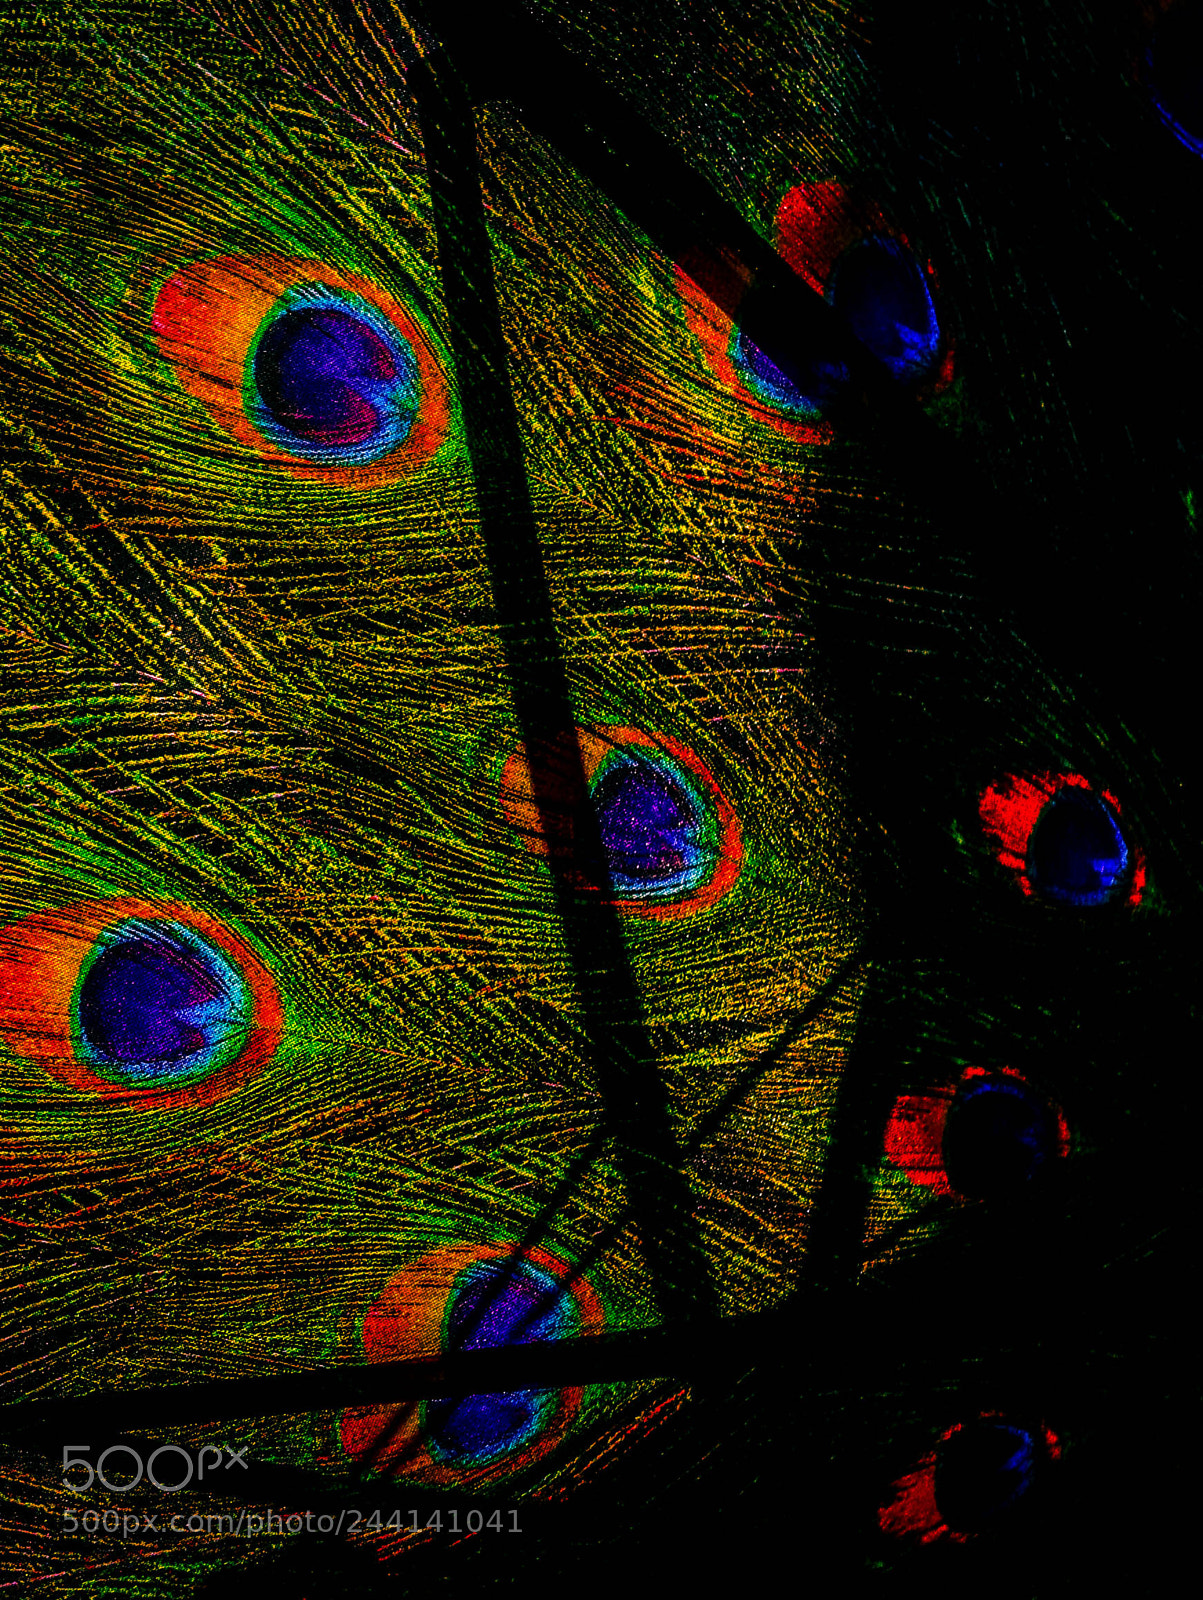 Pentax K-r sample photo. Peacock feather abstract photography